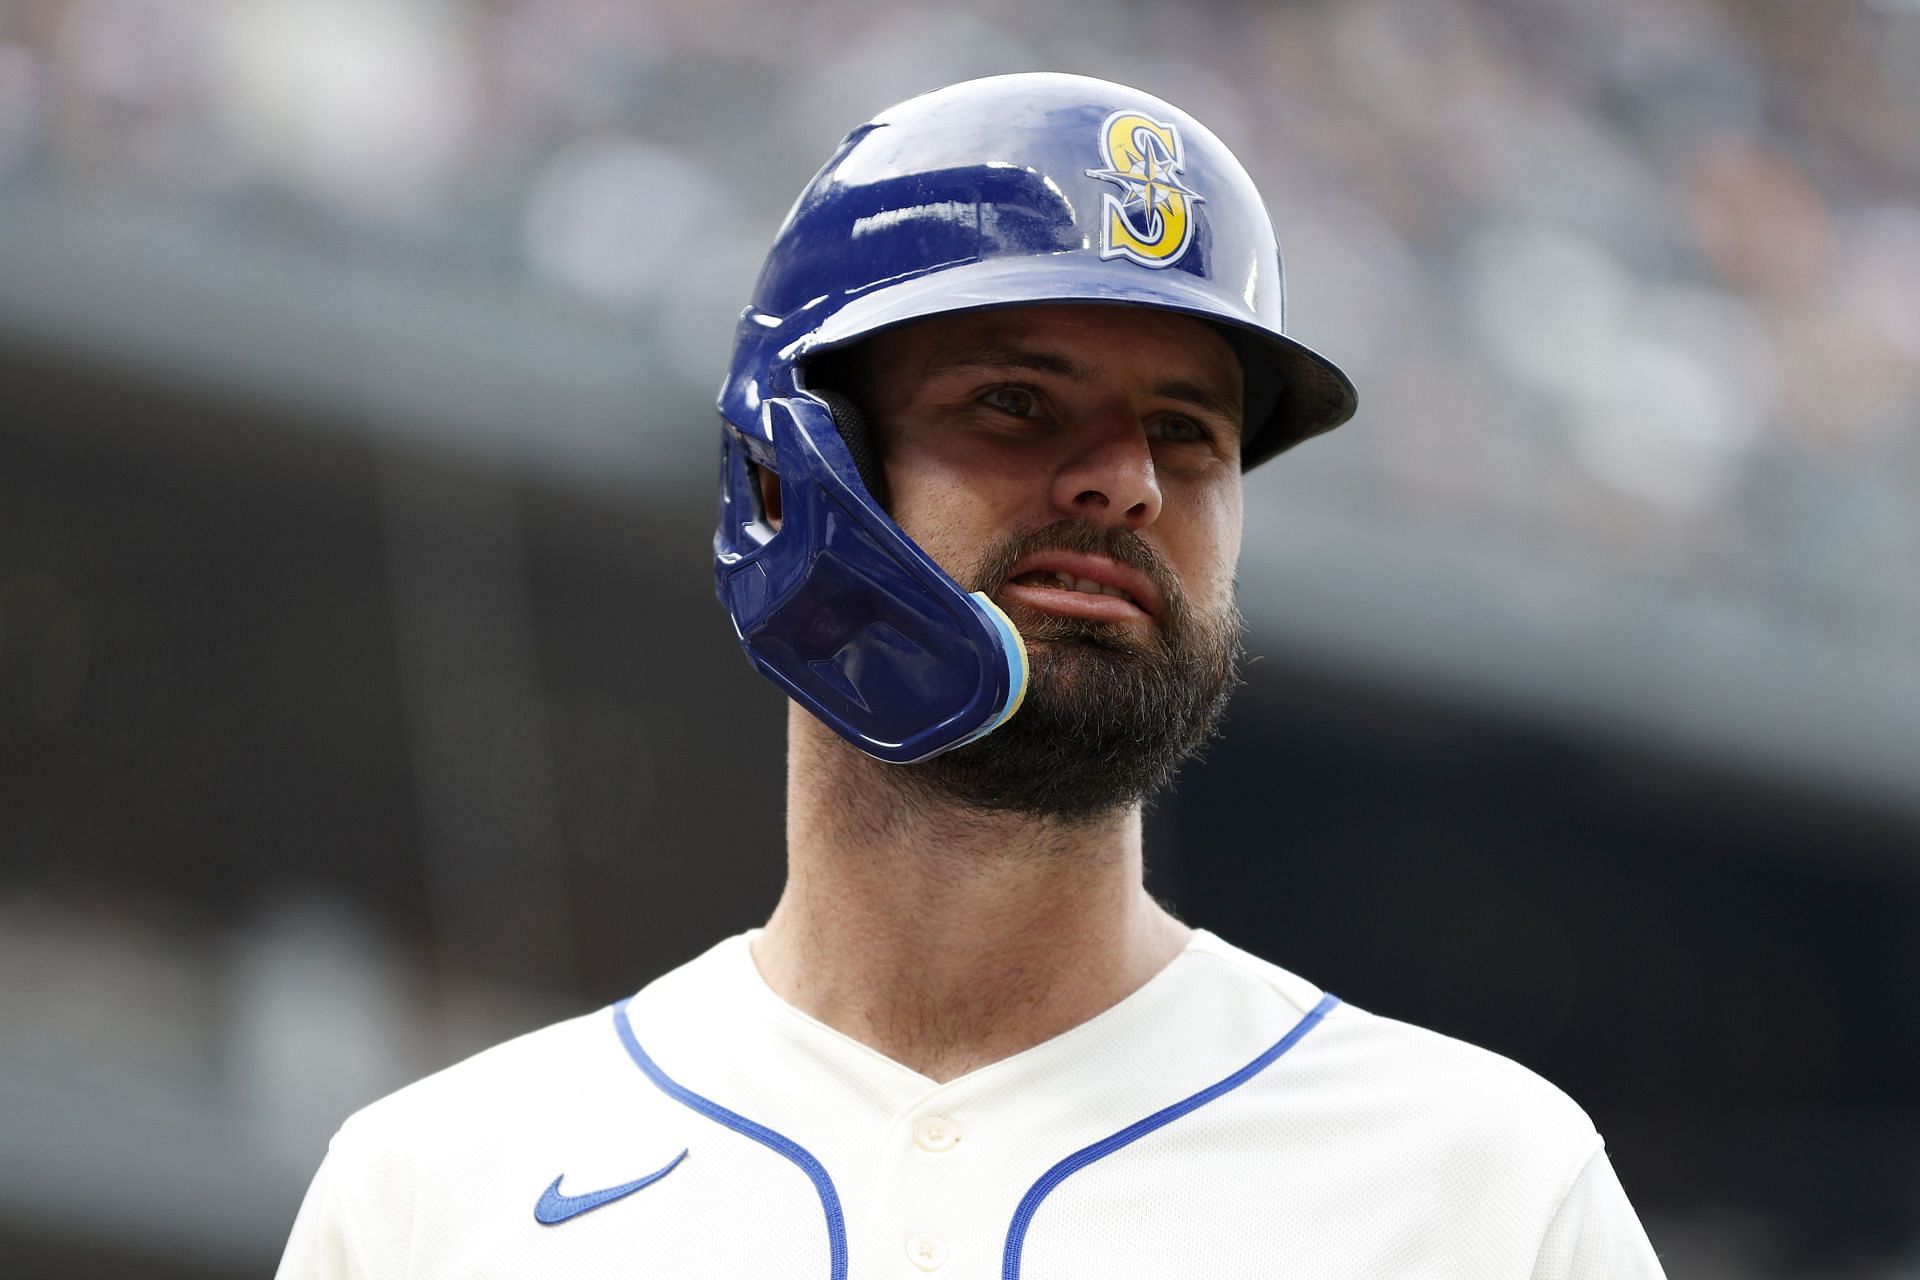 MLB Trade Rumors: Jesse Winker being shopped by the Mariners after poor  season at the plate